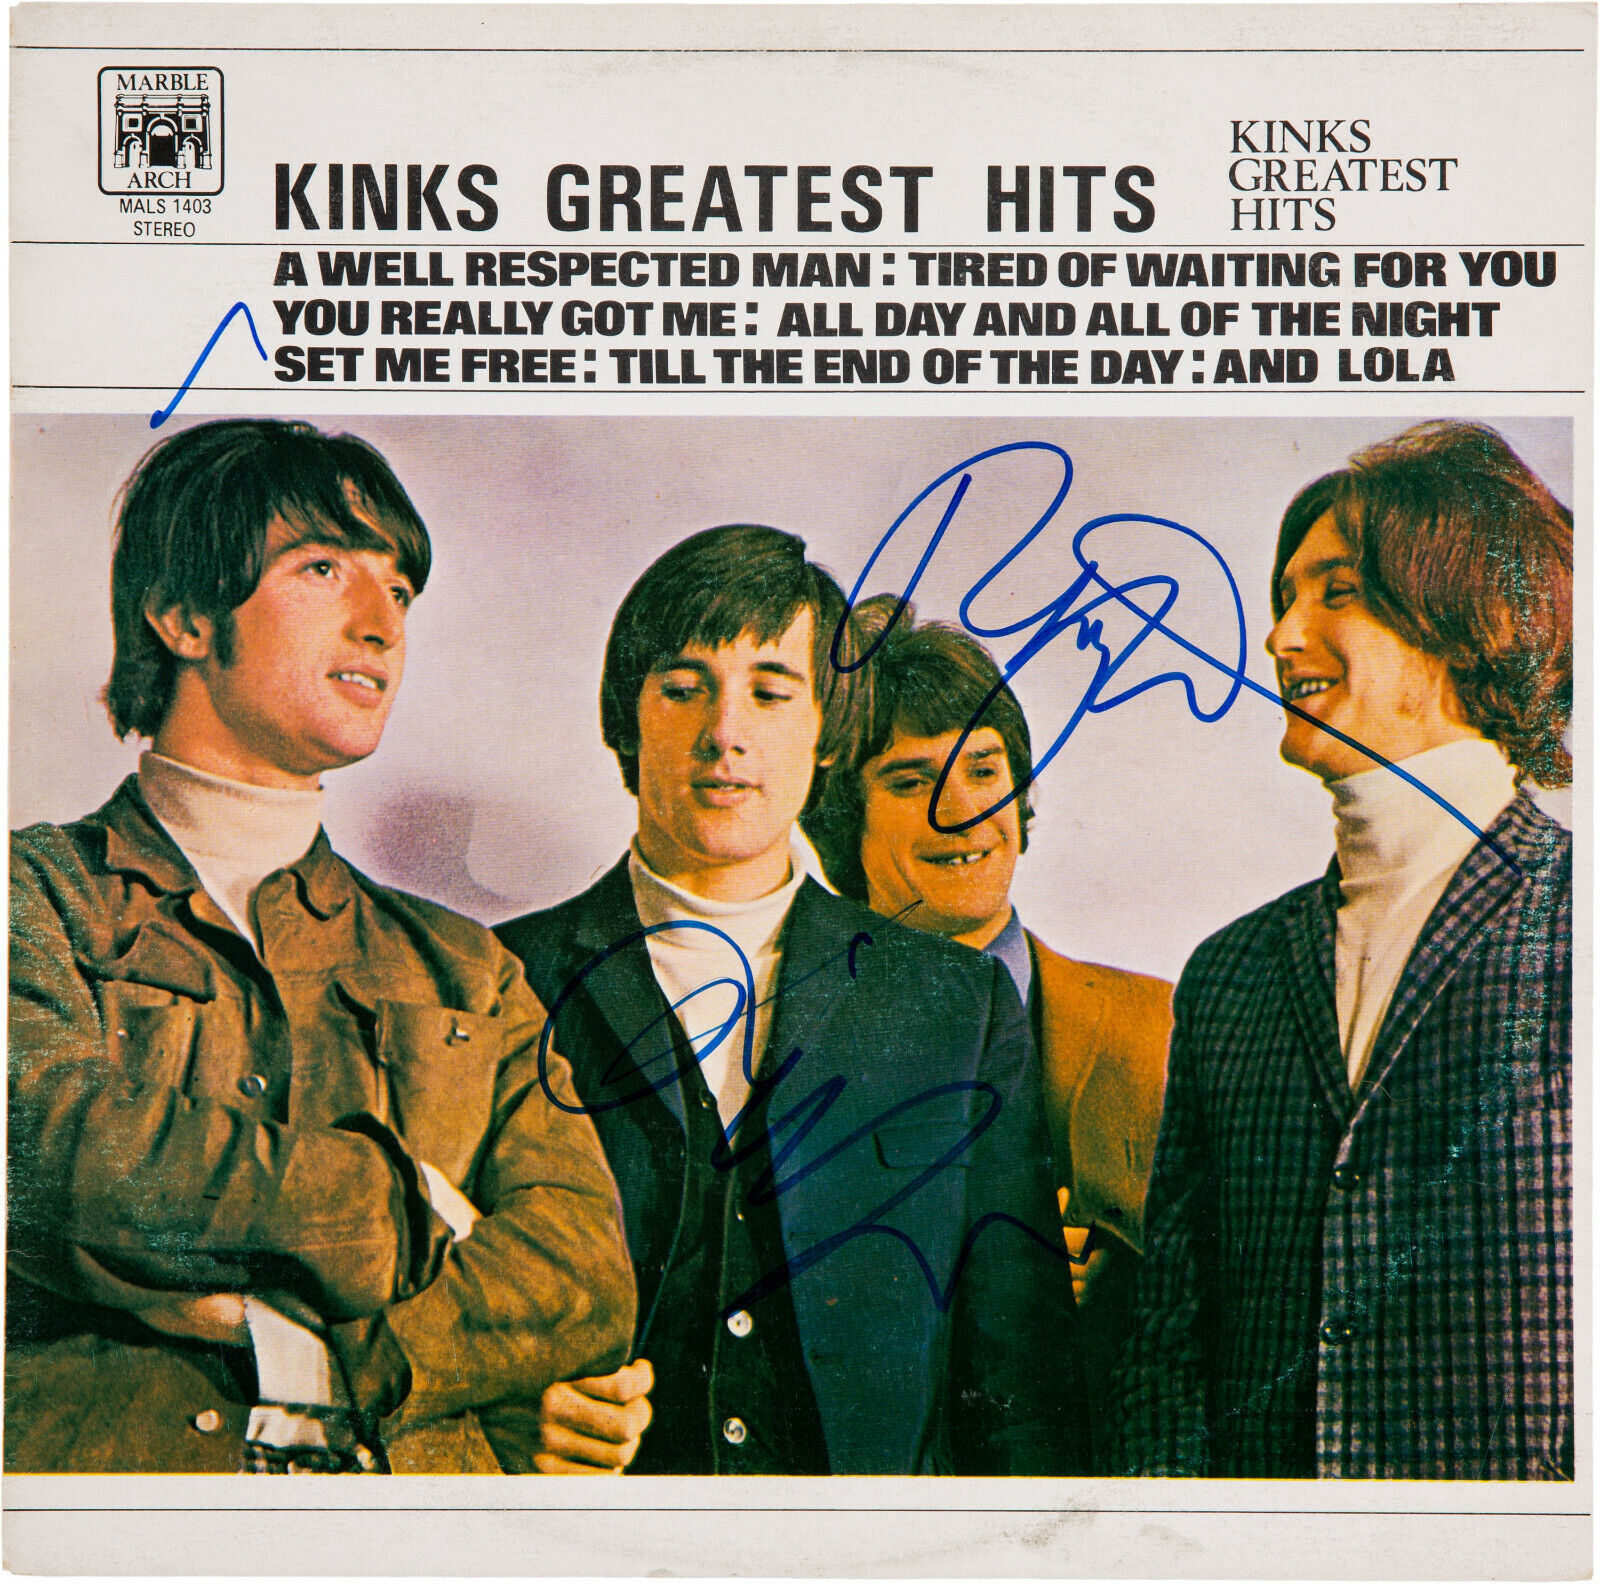 THE KINKS Signed Photo Poster paintinggraph - 1960s Pop/Beat Group RAY / DAVE DAVIES - preprint